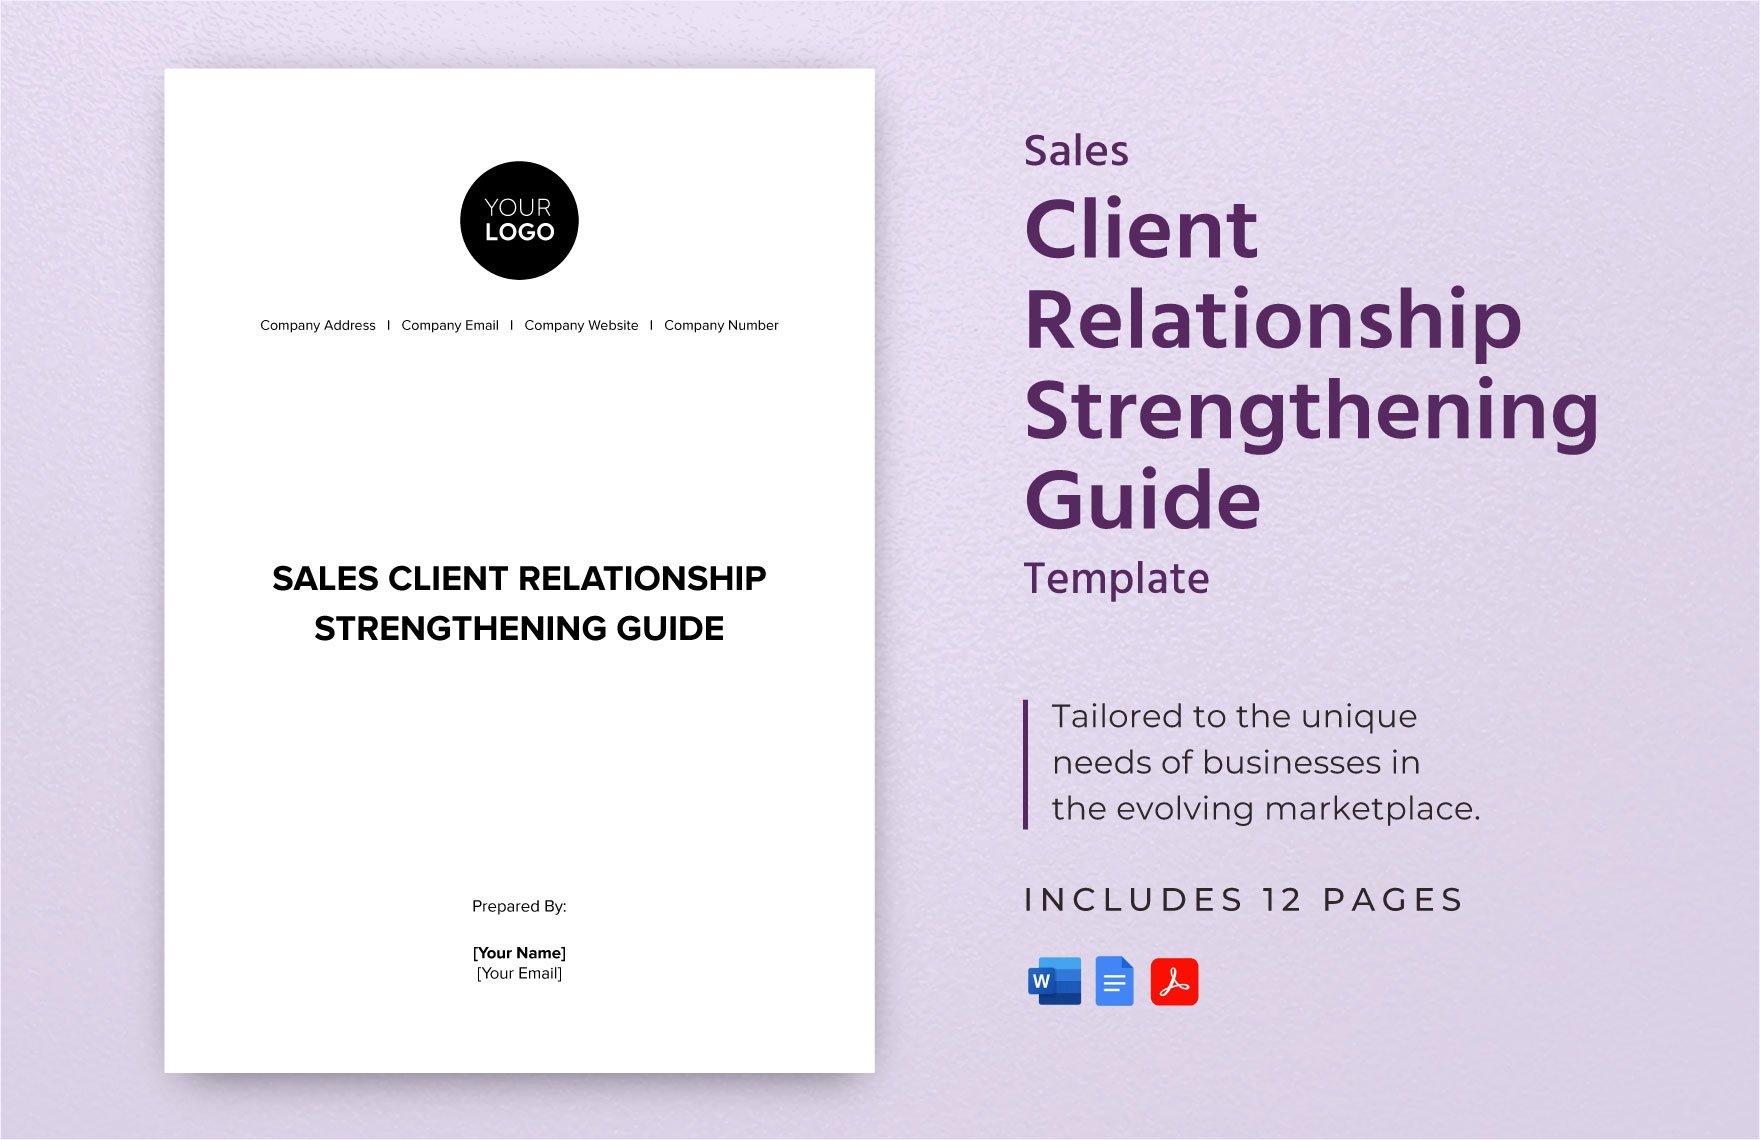 Sales Client Relationship Strengthening Guide Template in Word, Google Docs, PDF